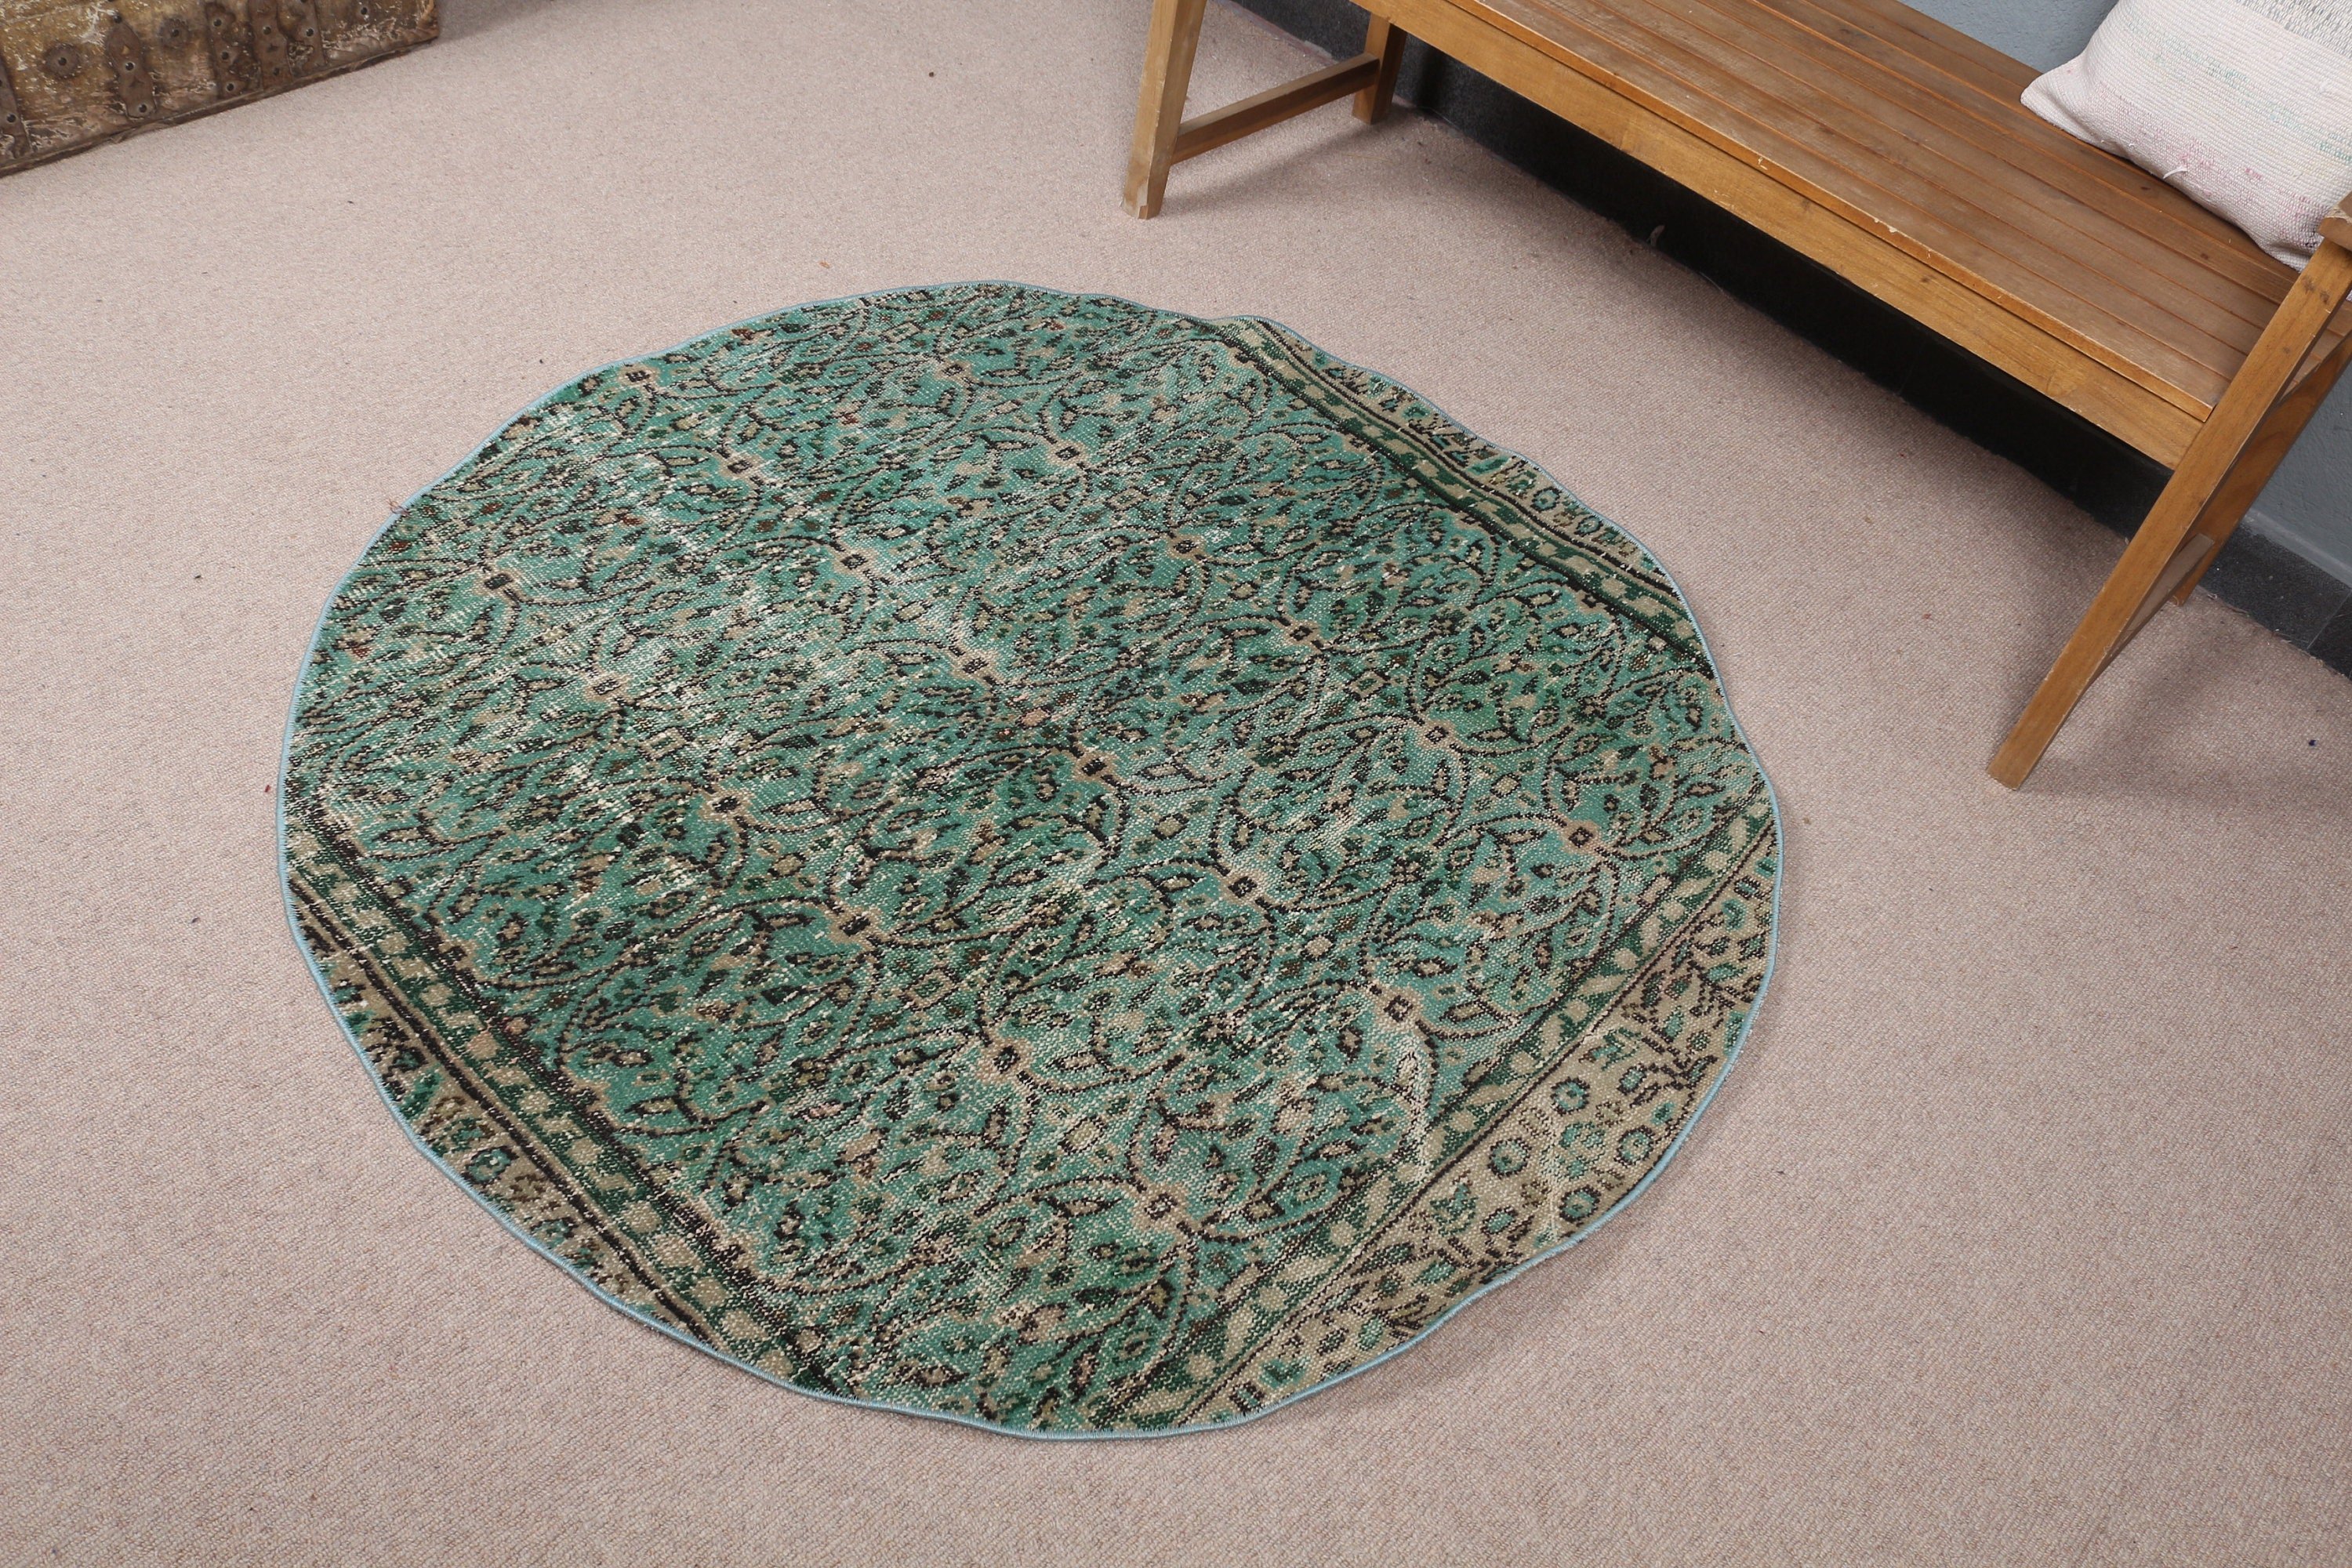 Bedroom Rug, Vintage Rug, Rugs for Kitchen, 4.3x4.3 ft Accent Rug, Green Anatolian Rugs, Antique Rug, Entry Rug, Oushak Rugs, Turkish Rug